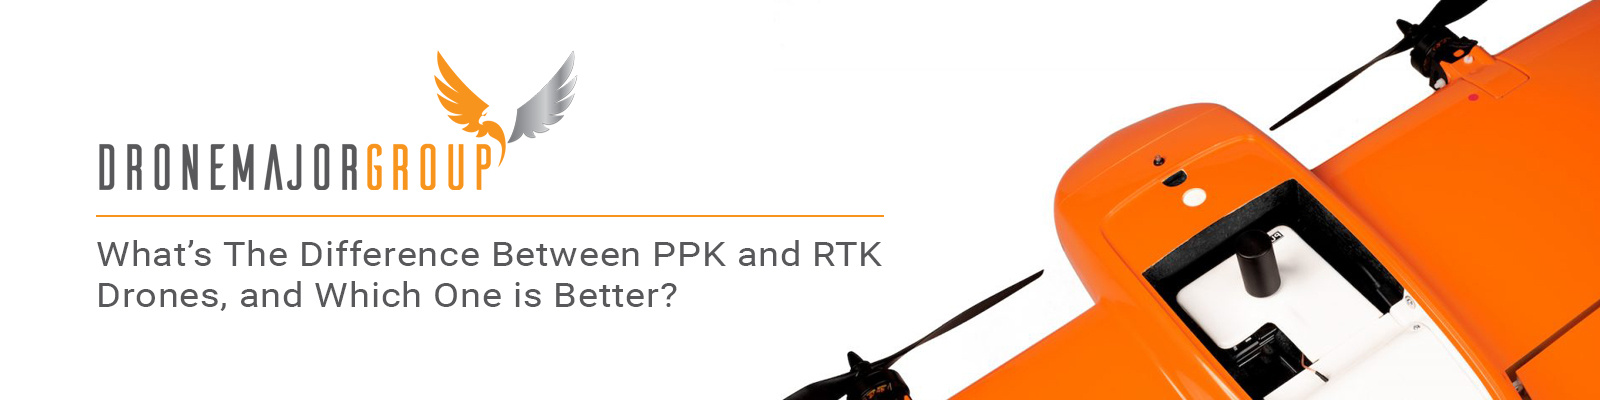 What’s the difference between PPK and RTK drones, and which one is better?